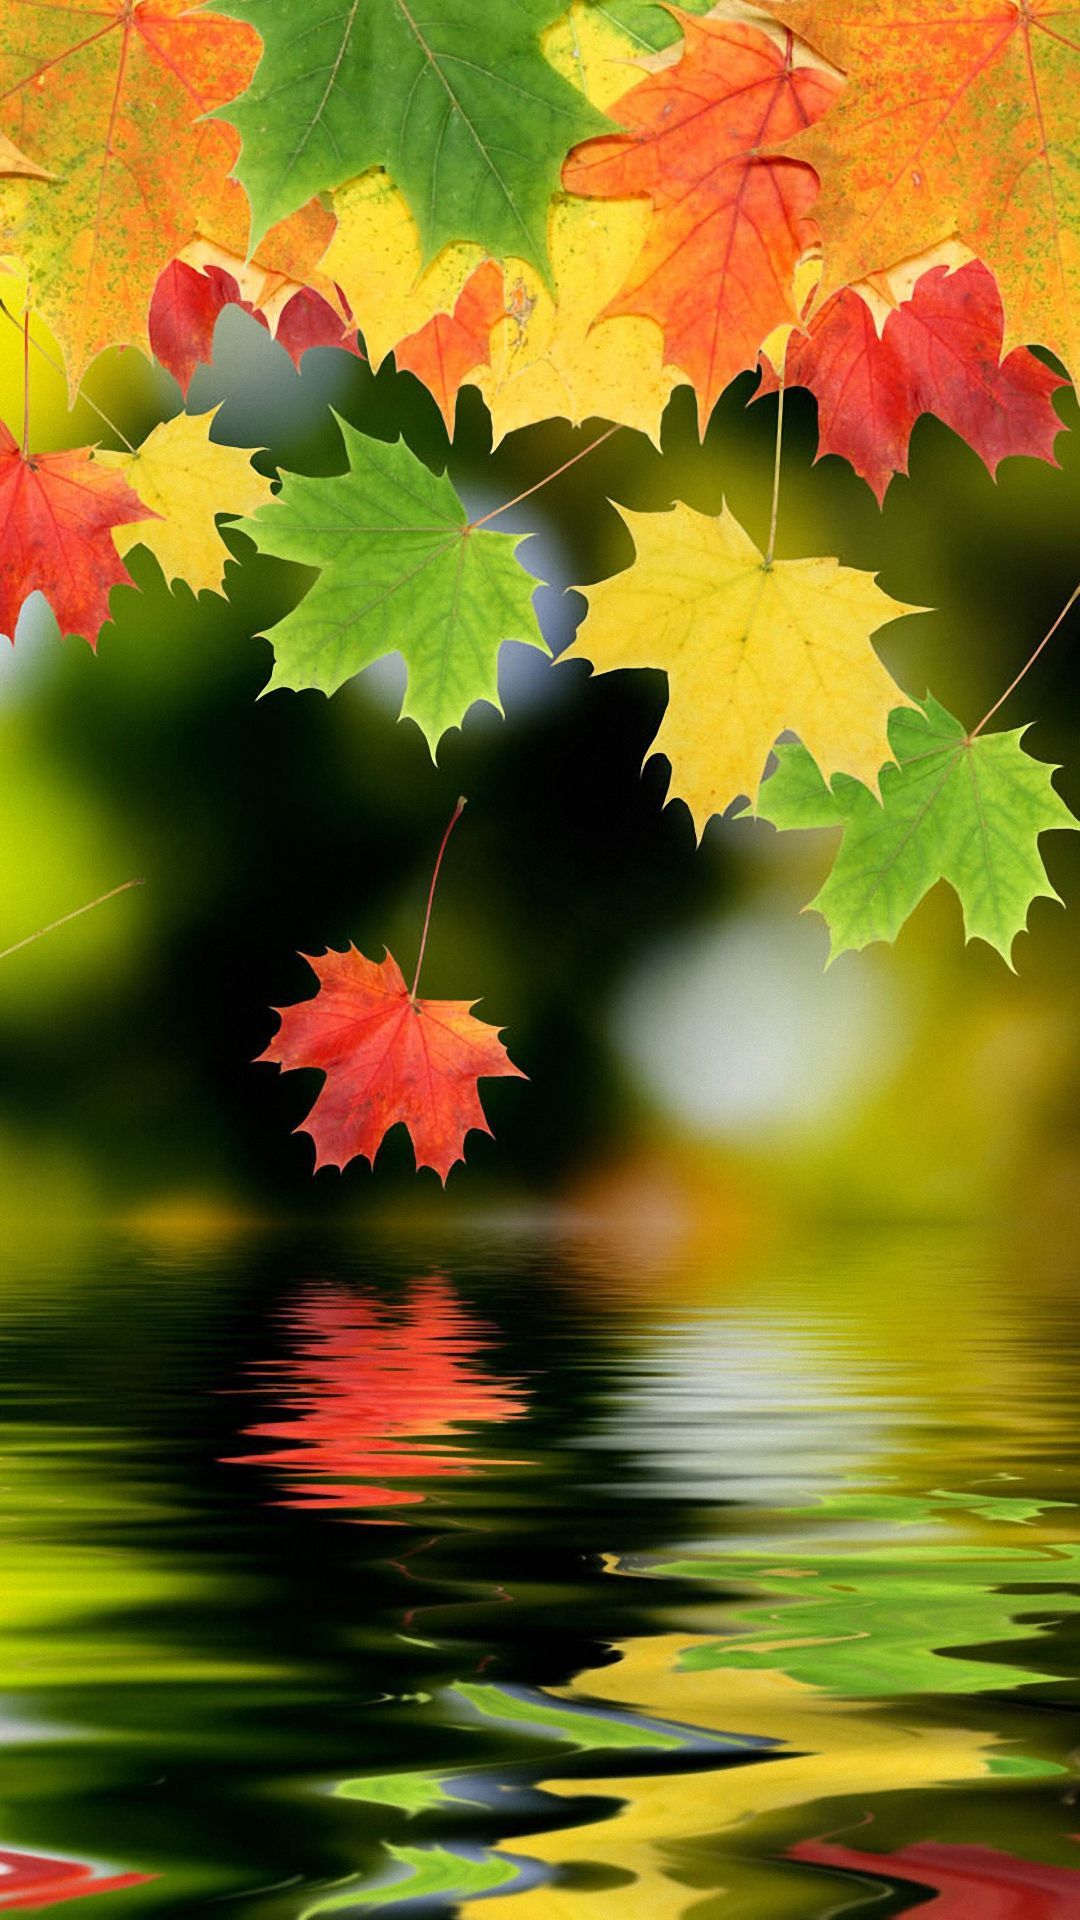 Maple Leaf Android Wallpaper 1080p Phone Mobile Full HD Wallpaper Download